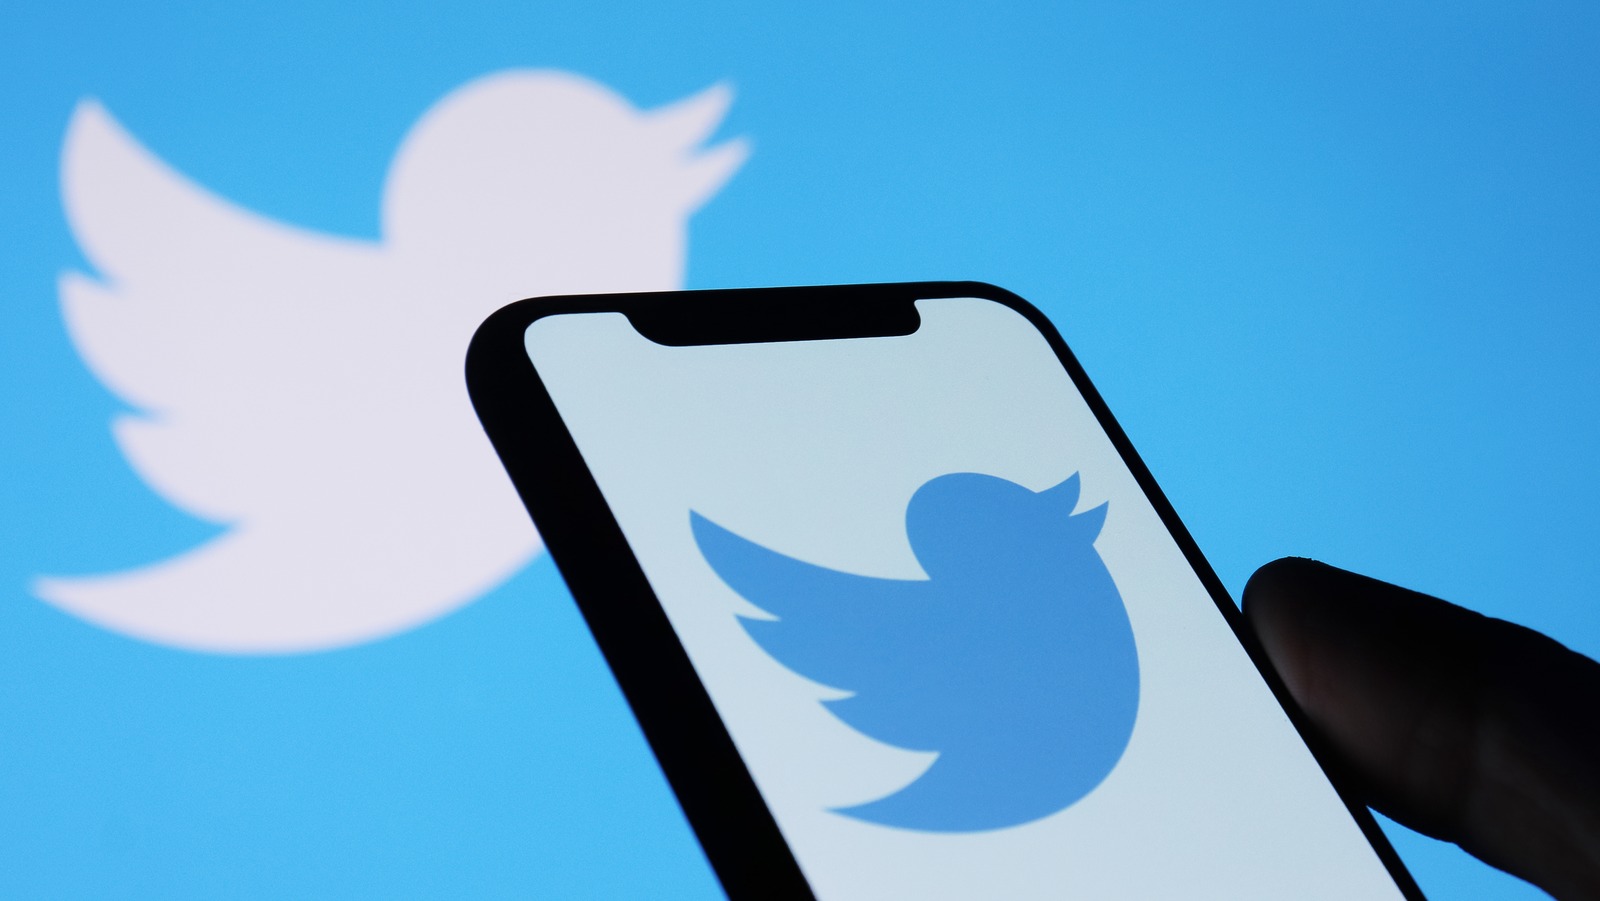 Twitter Finally Rolls Out Two Important Accessibility Enhancements